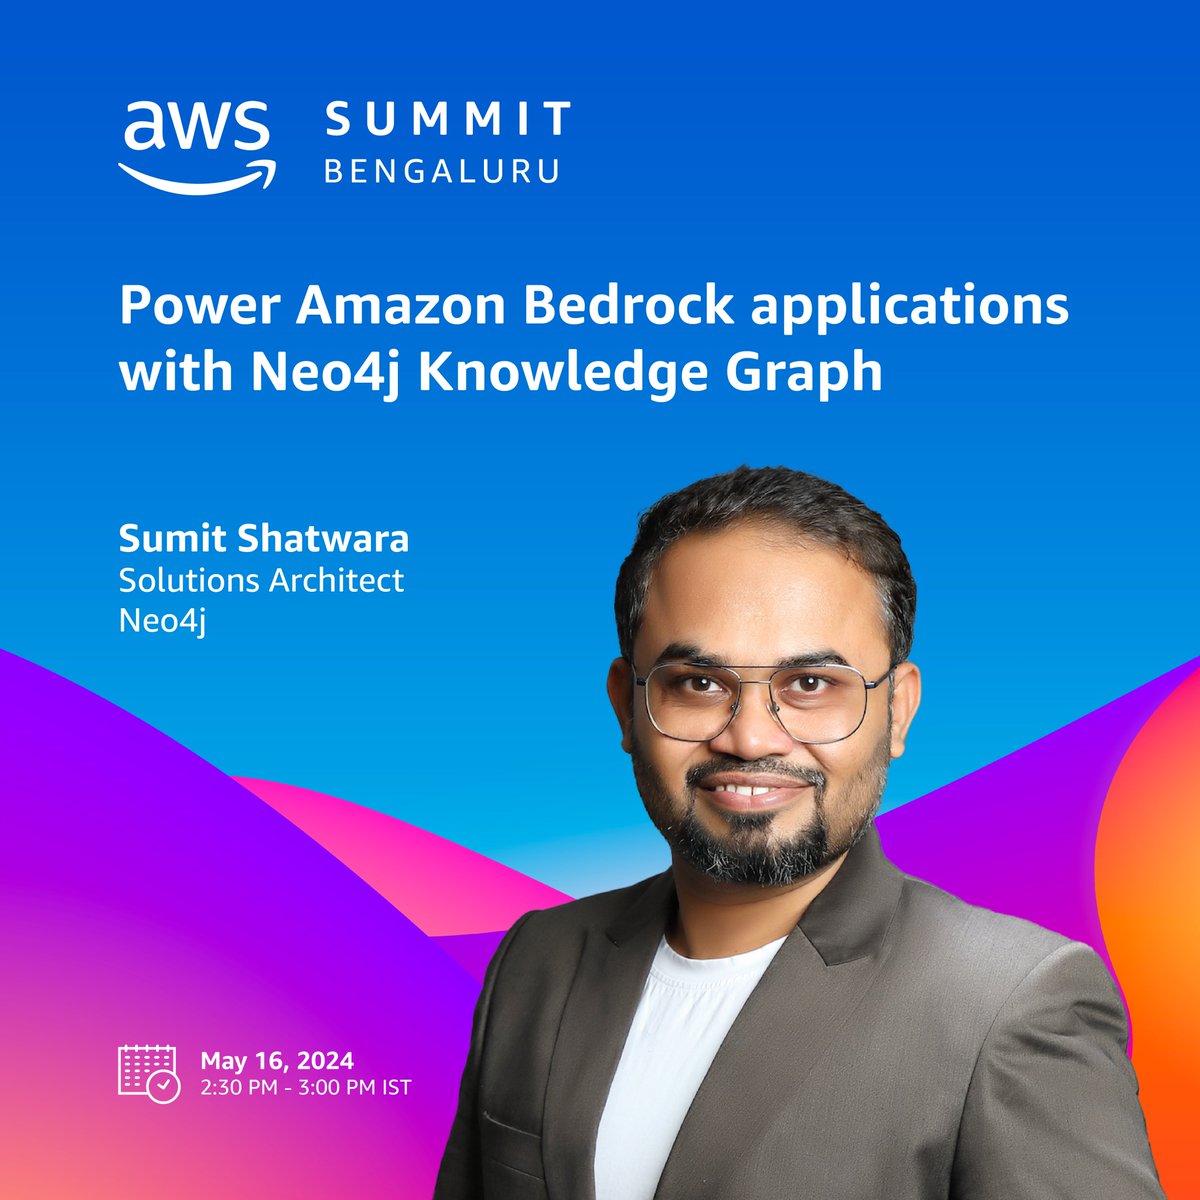 I'm delighted to announce that I'll speak at the upcoming AWS Summit on 'Powering Amazon Bedrock applications with Neo4j Knowledge Graph.' The session is lined up for next week in Bengaluru, India.
 
#Neo4j #AWS #AmazonBedrock #KnowledgeGraph #GraphDatabase #TechTalk #AWSSummit